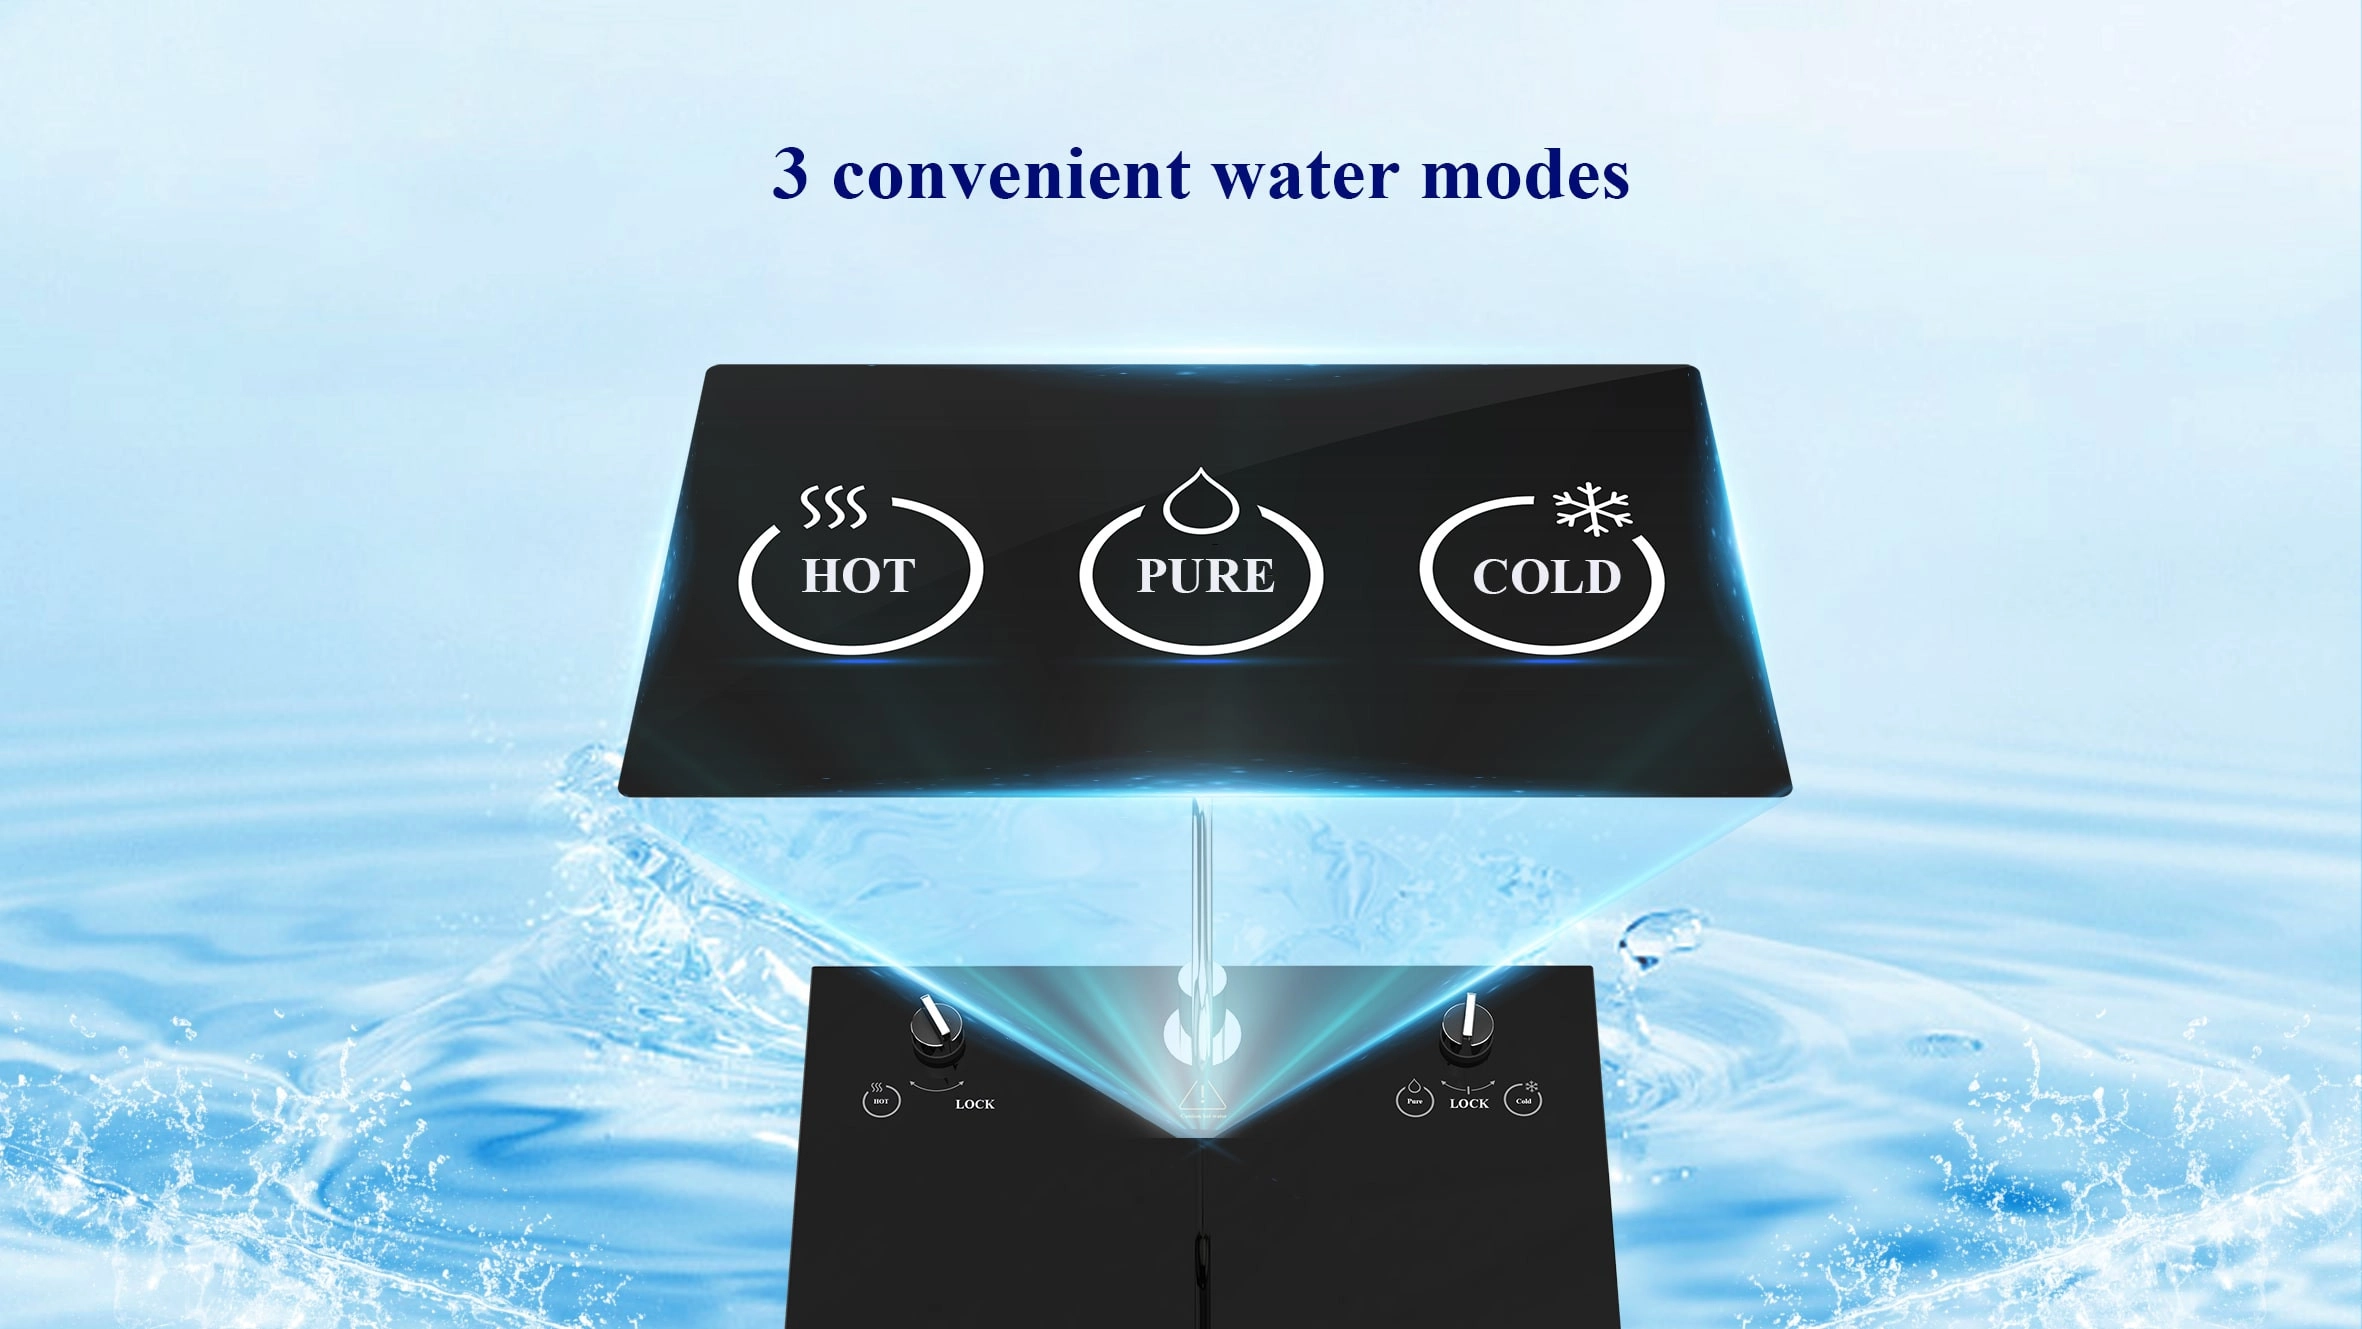 3 convenient water modes Hot - Cold - RO